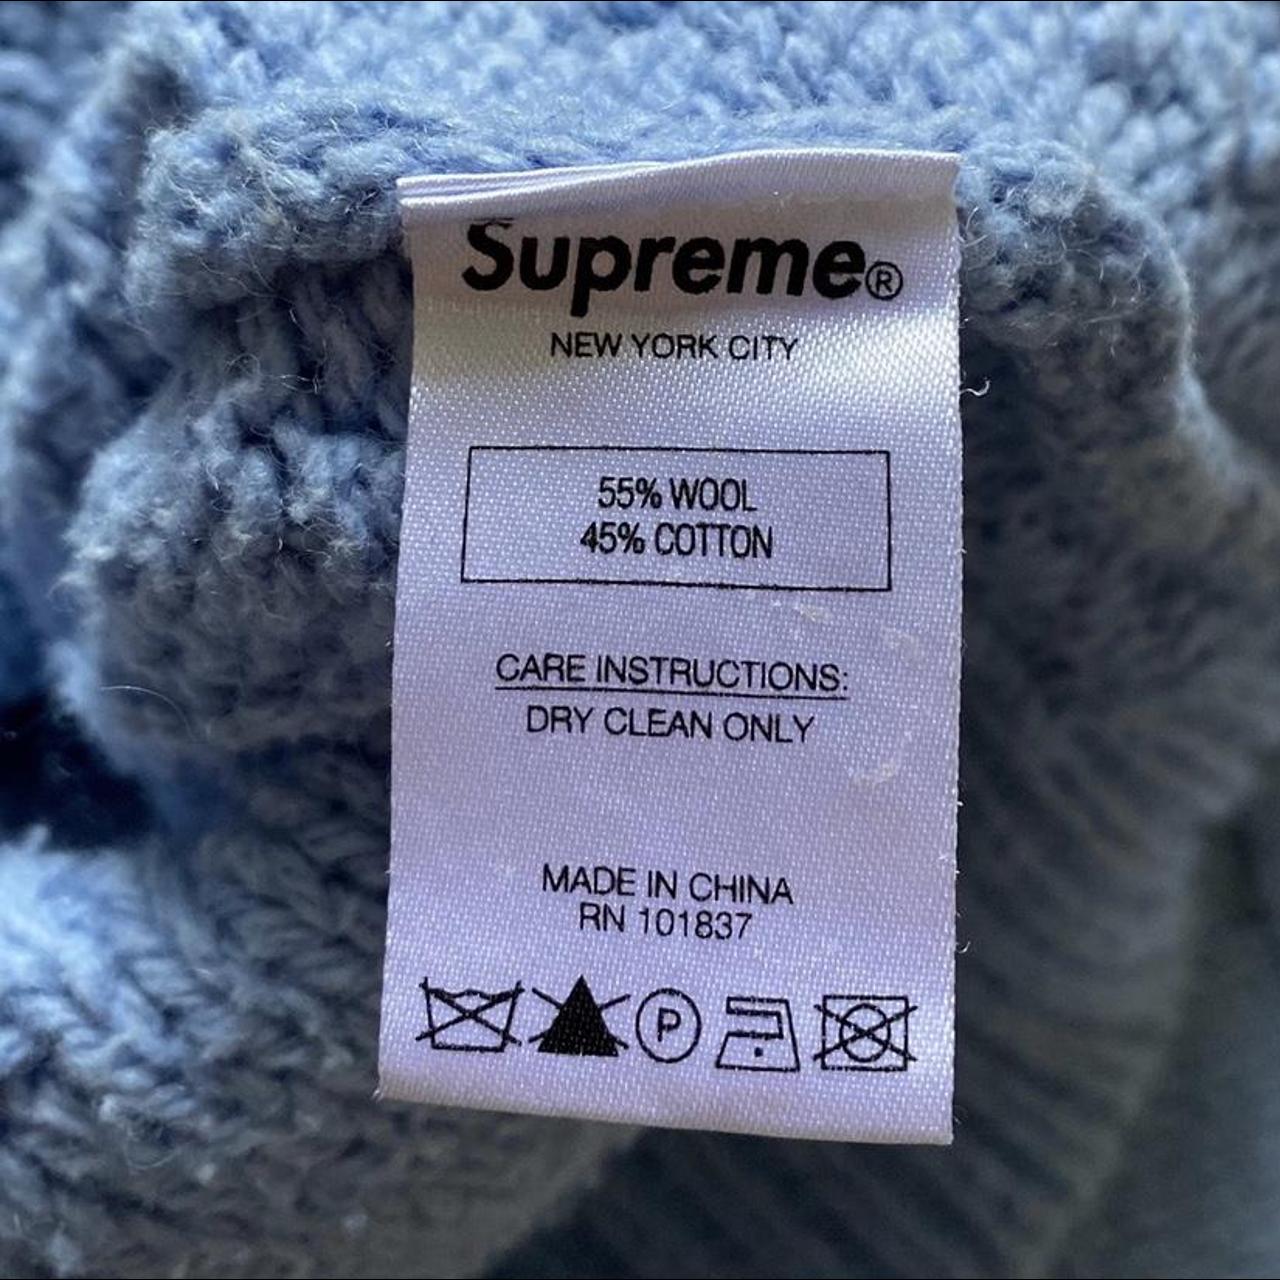 Supreme cable knit cardigan sweater great quality - Depop